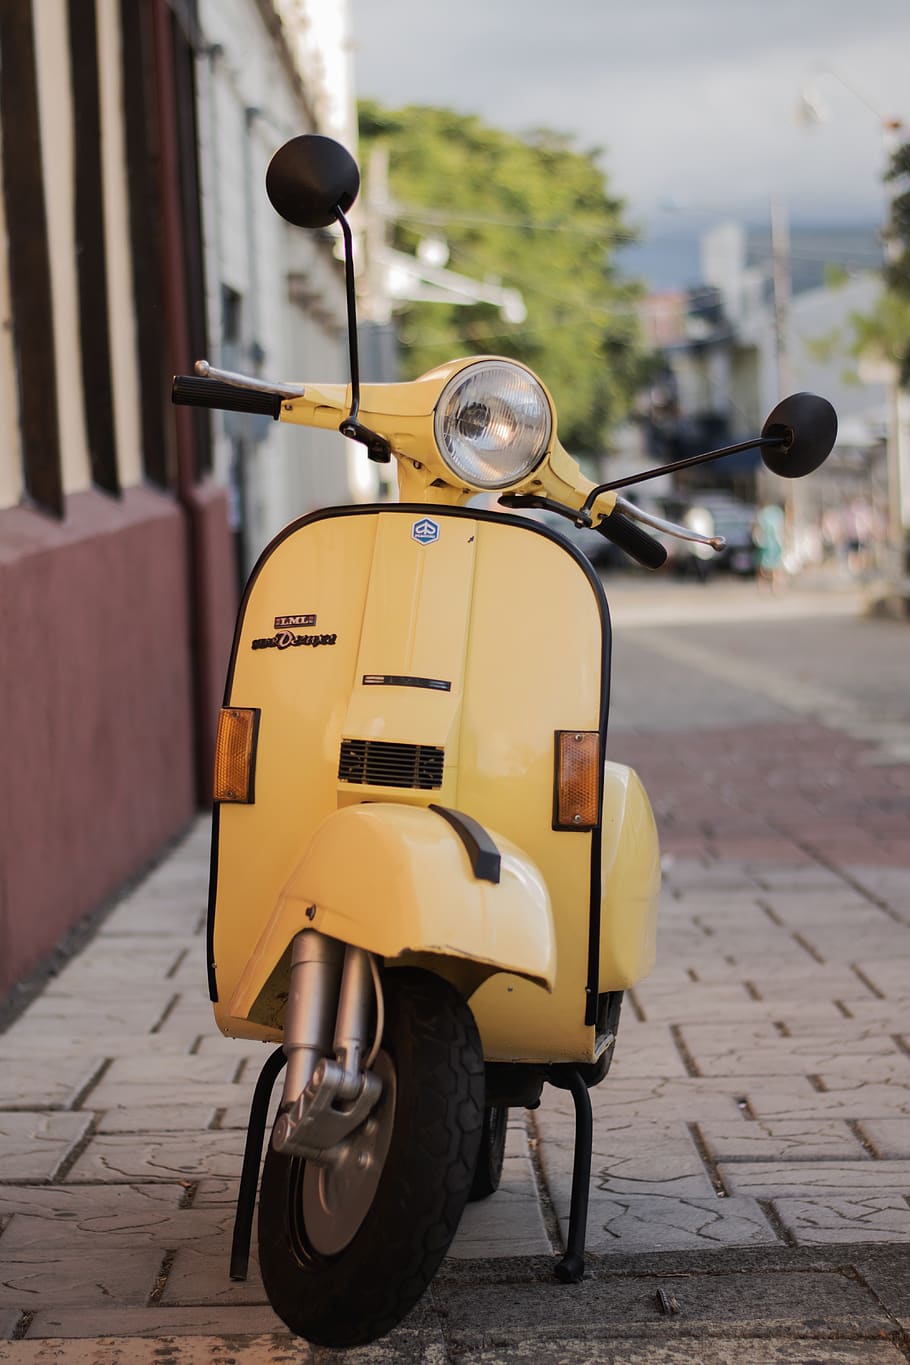 scooter, yellow, vehicle, retro, vintage, street, wheels, transport, motorcycle, mode of transportation